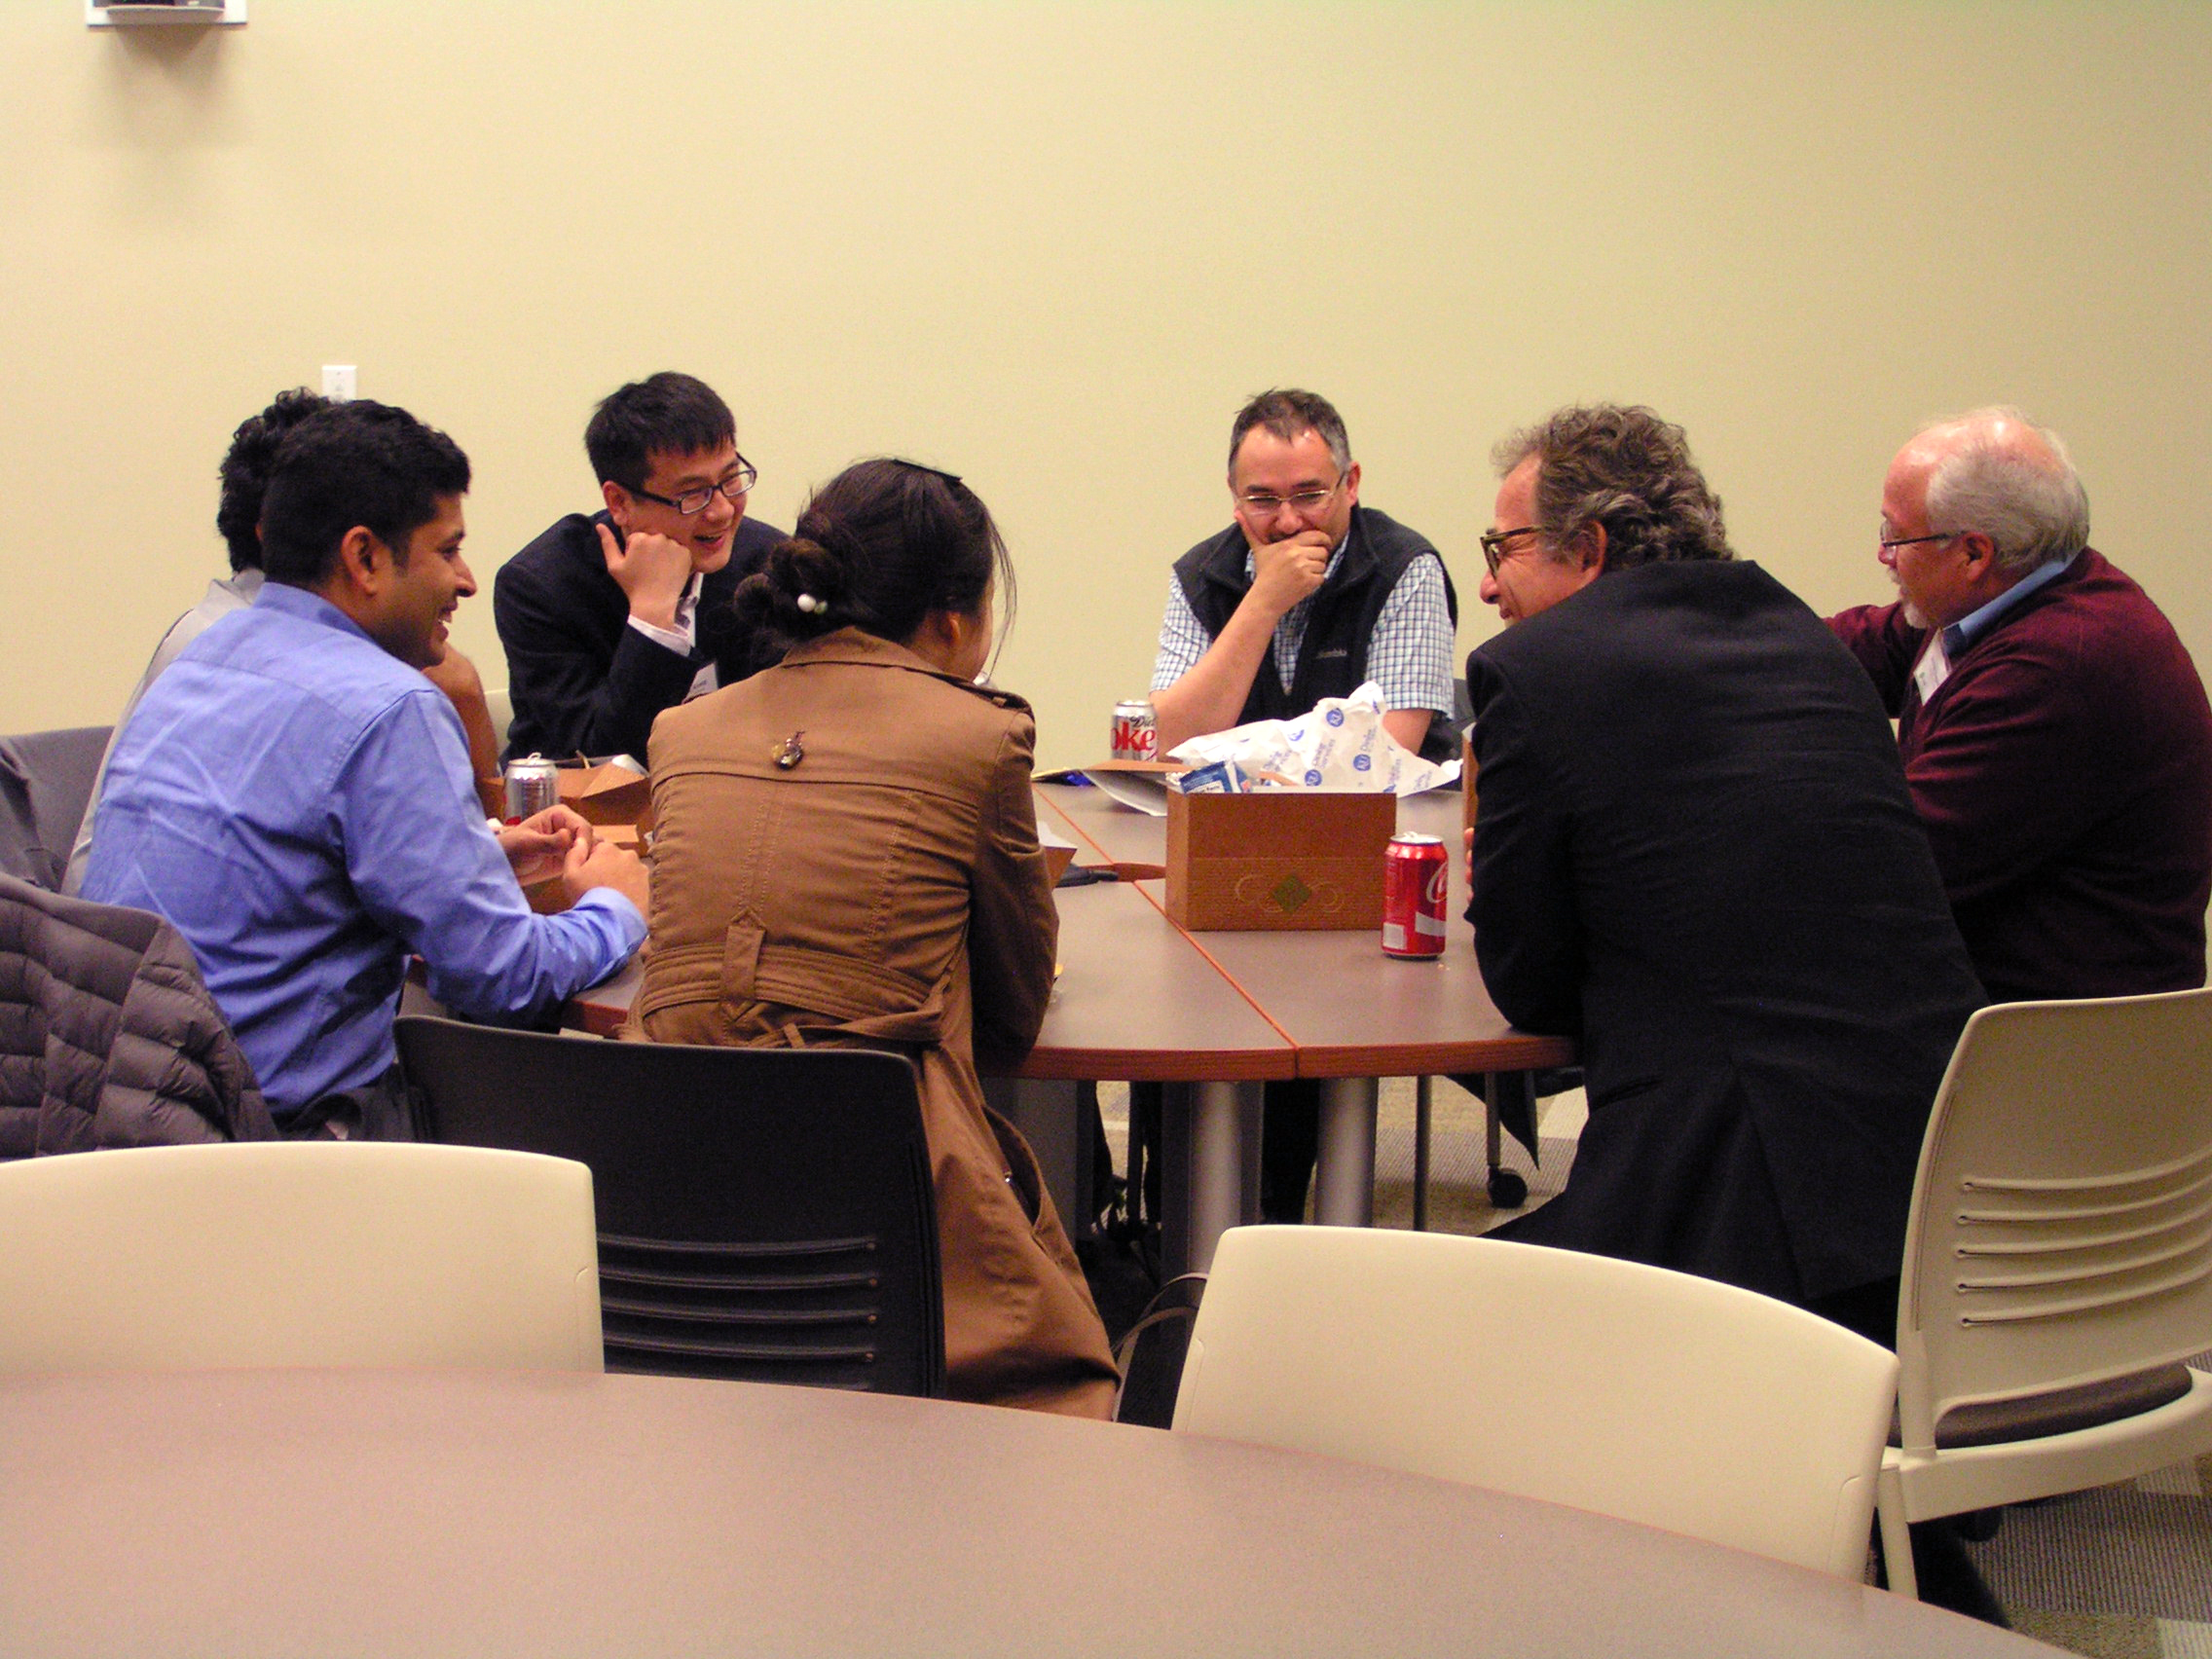 Group of individuals gathered around a table, talking.